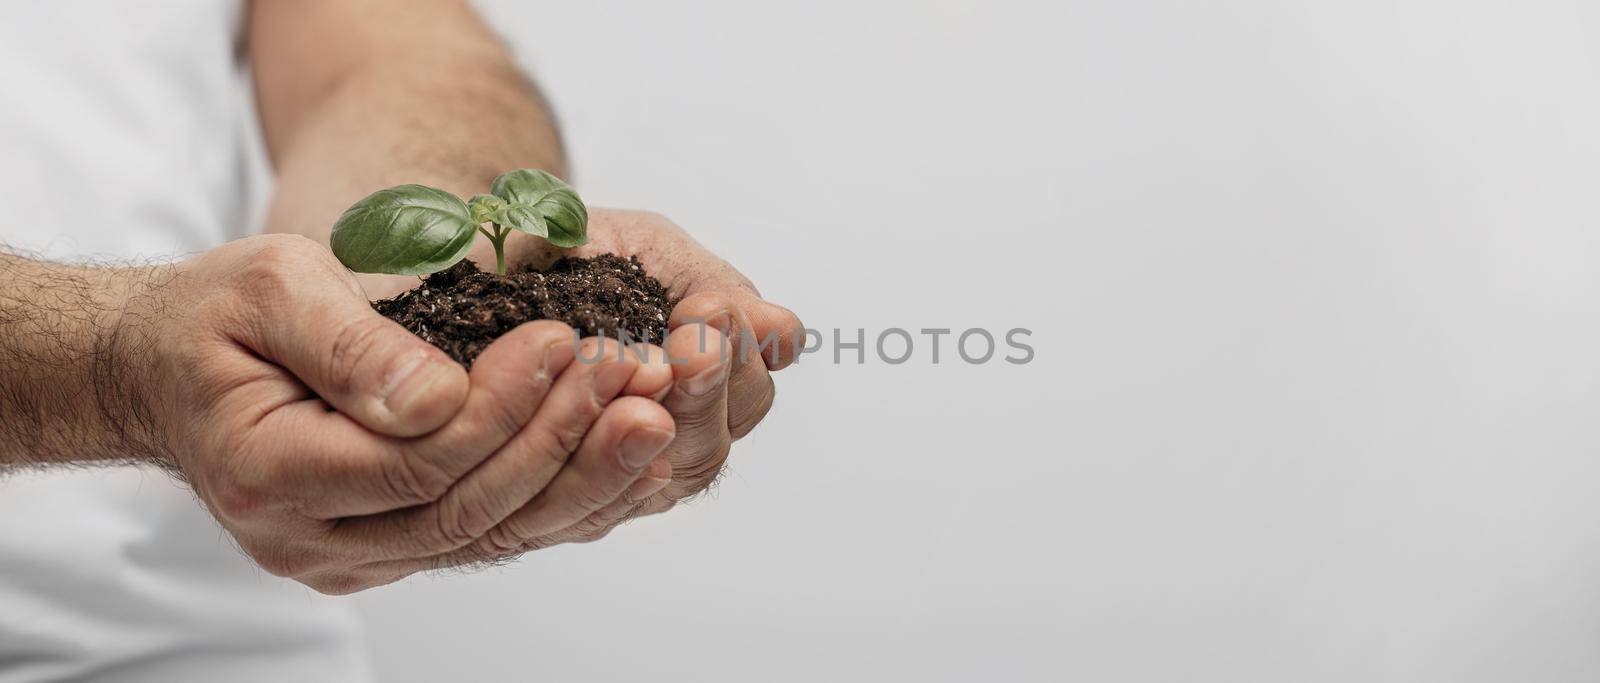 side view male hands holding soil plant with copy space. High quality beautiful photo concept by Zahard